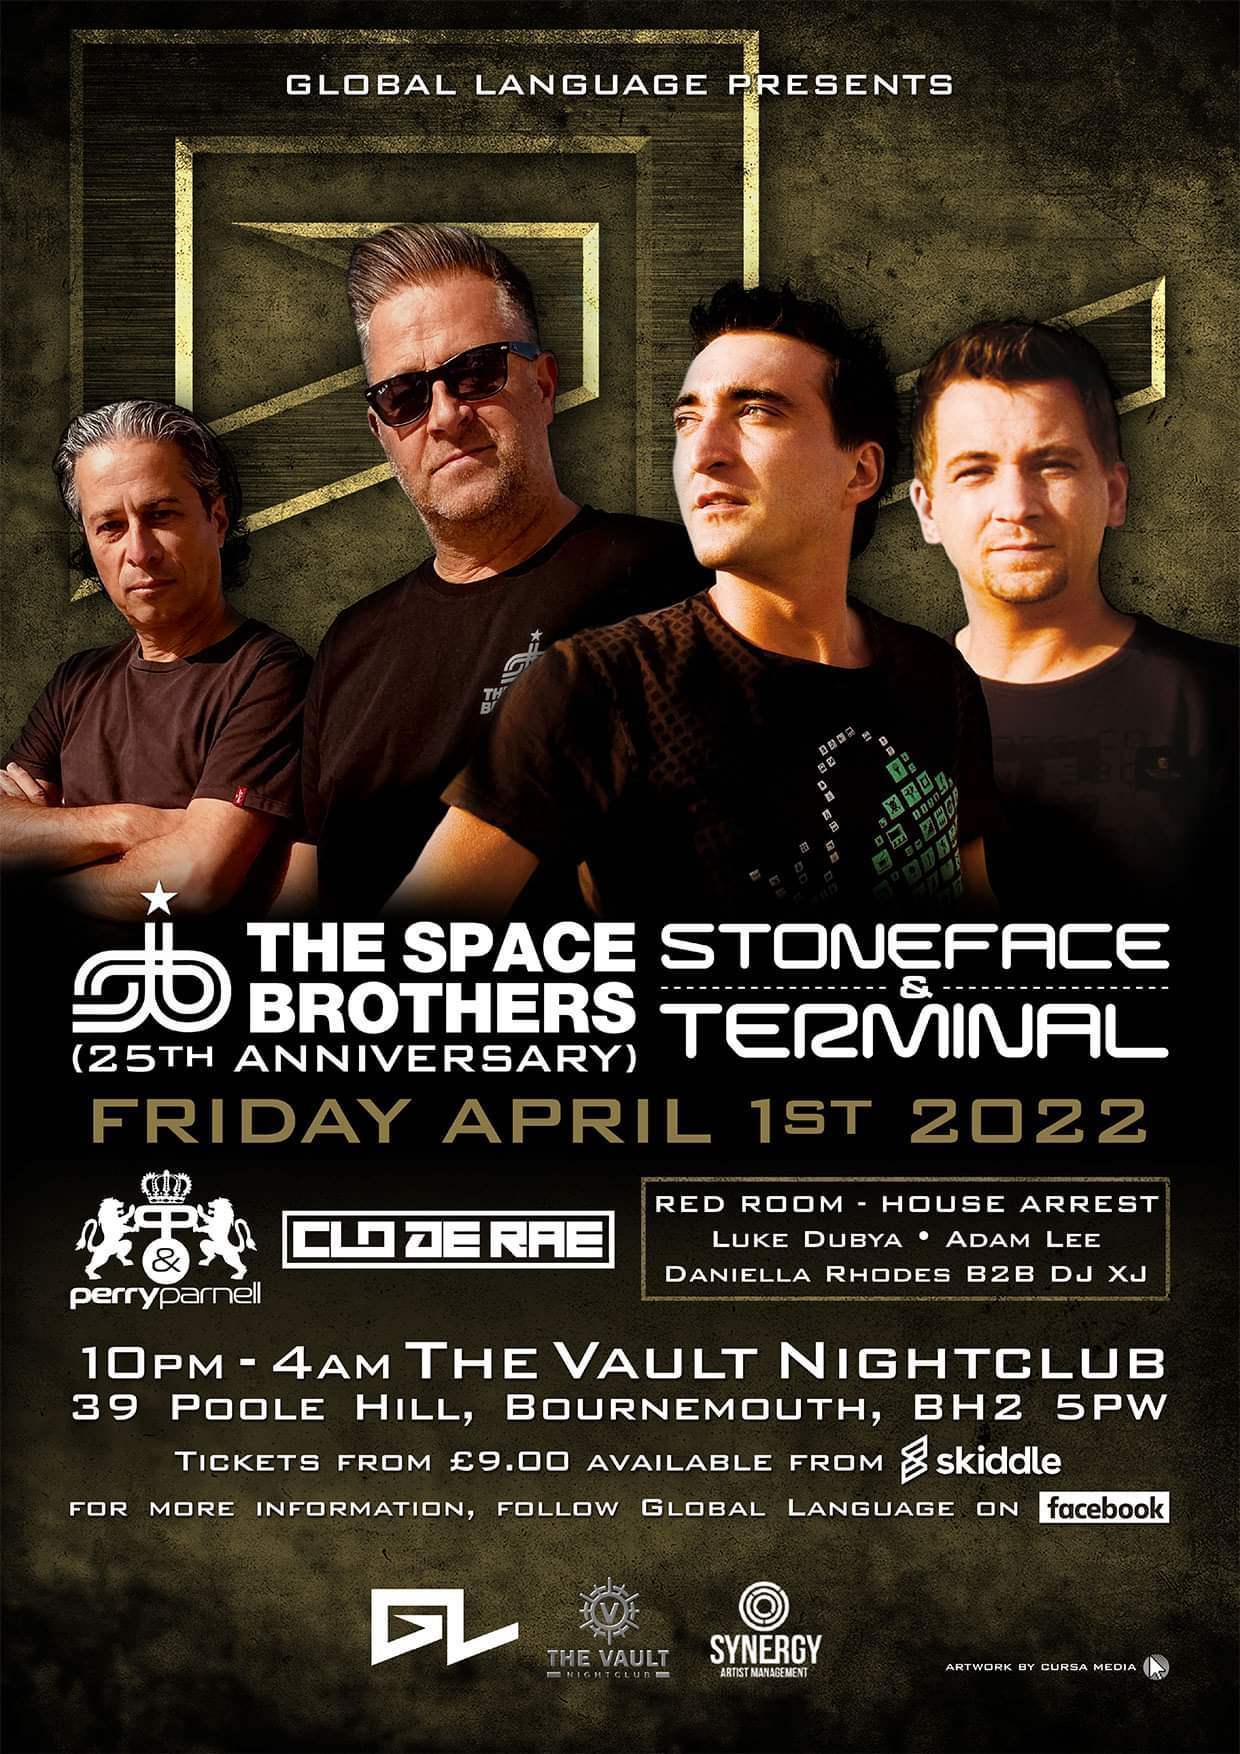 Global Language - The Space Brothers with Stoneface and Terminal - Página frontal